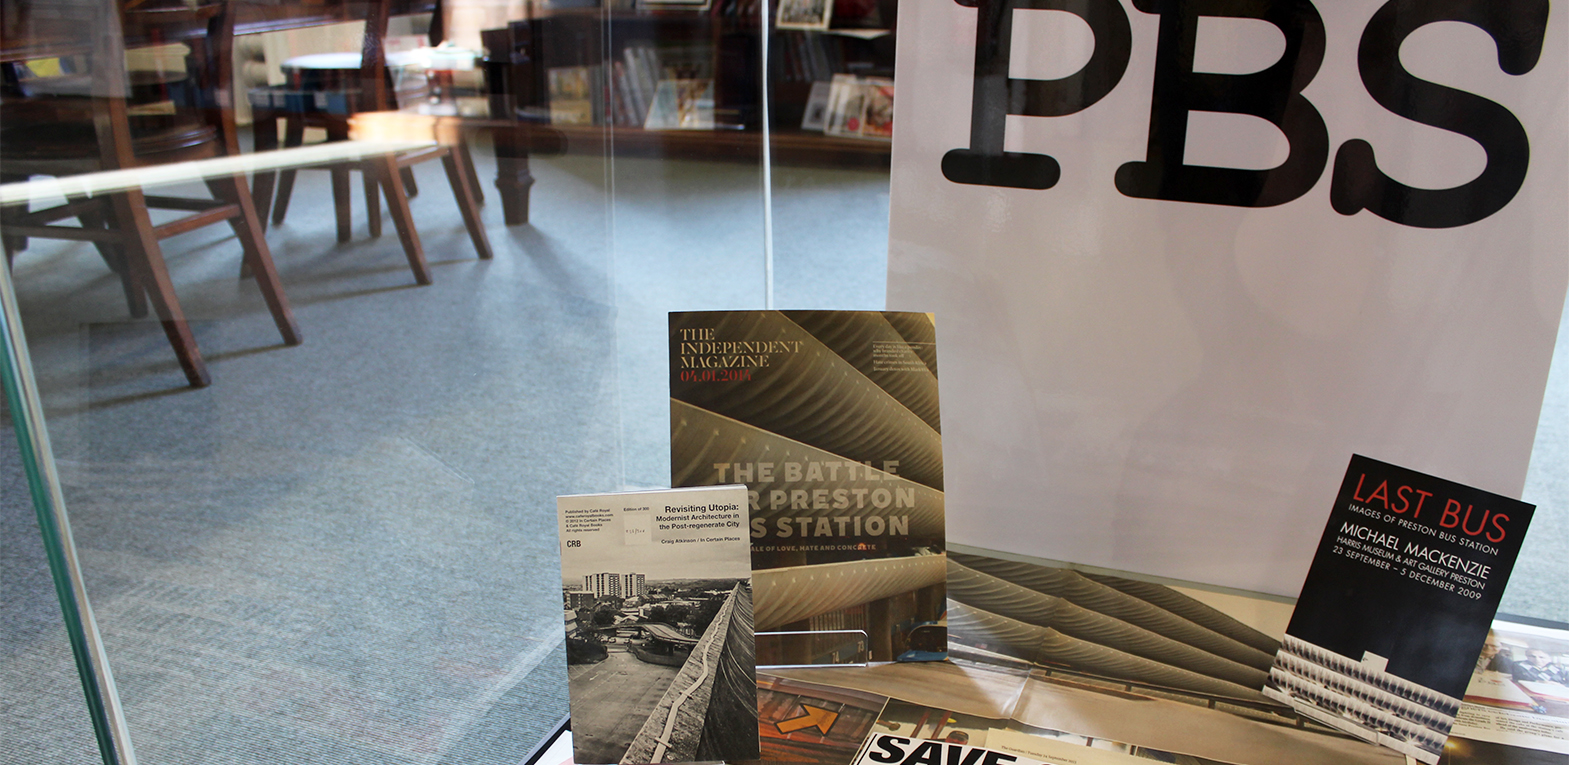 The exhibition in the Harris Museum. A display case with zines, publications and flyers about Preston Bus Station.